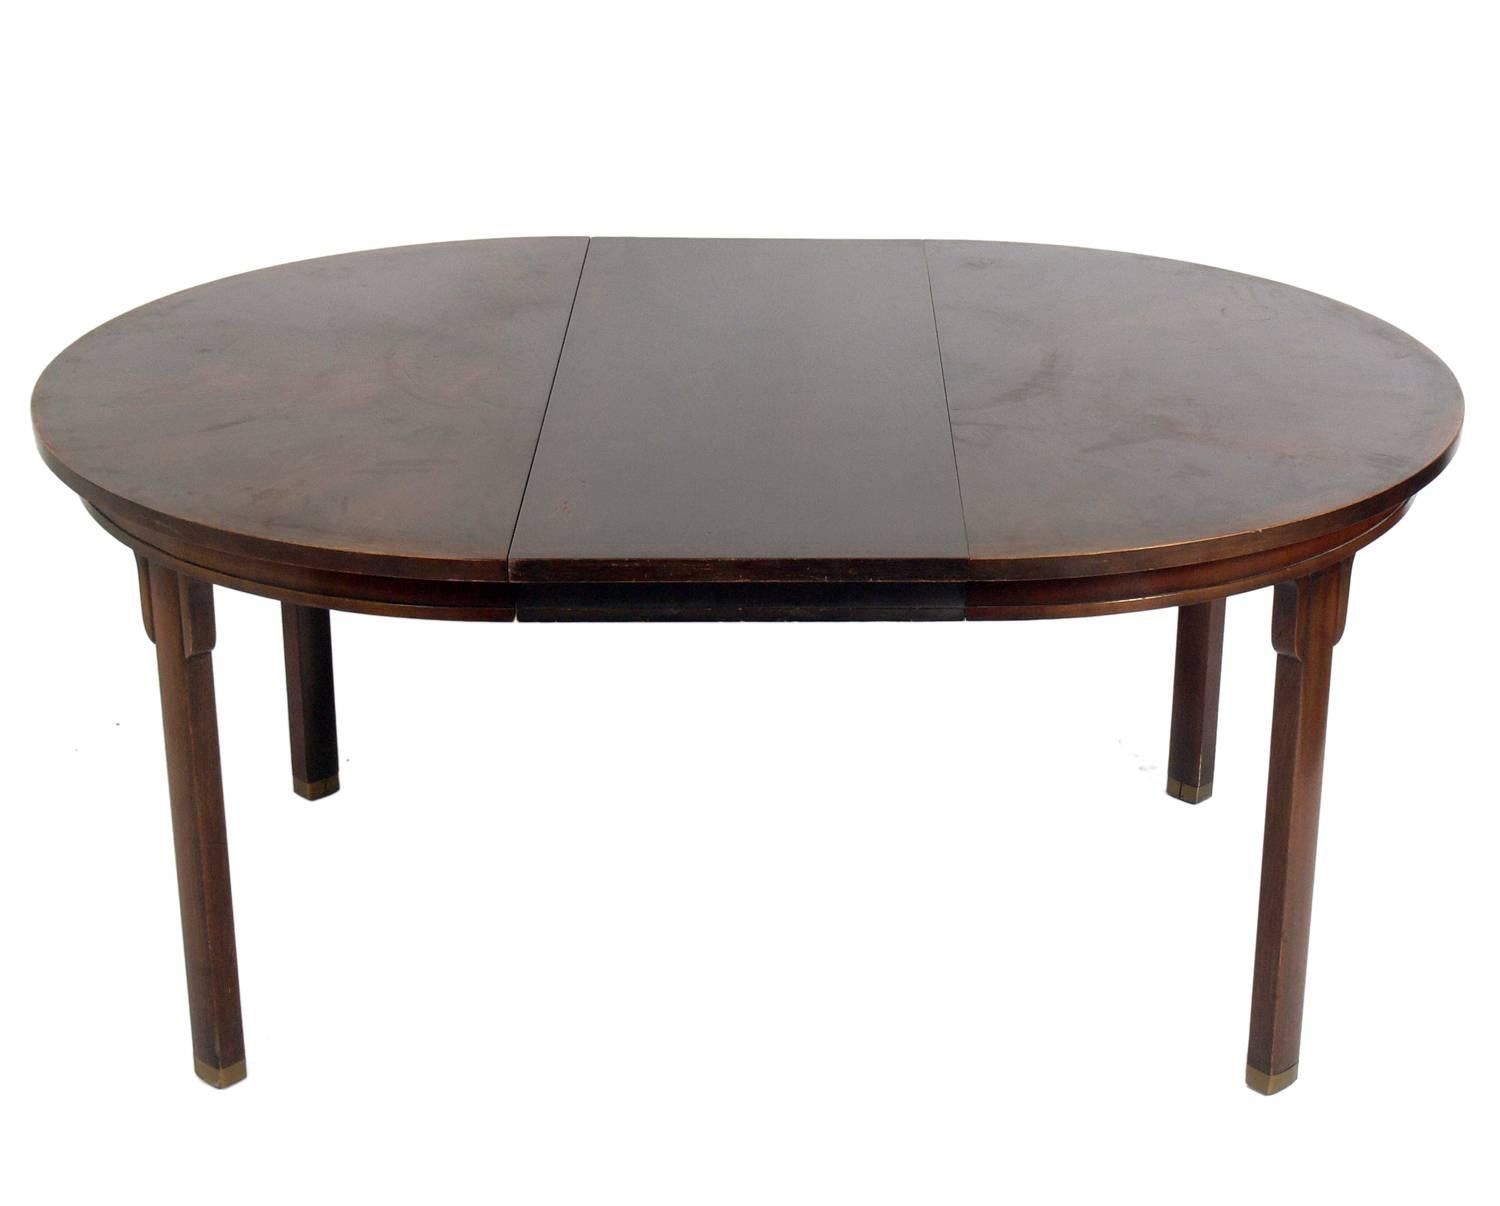 Mid-Century Modern Asian Inspired Dining Table by Michael Taylor for Baker